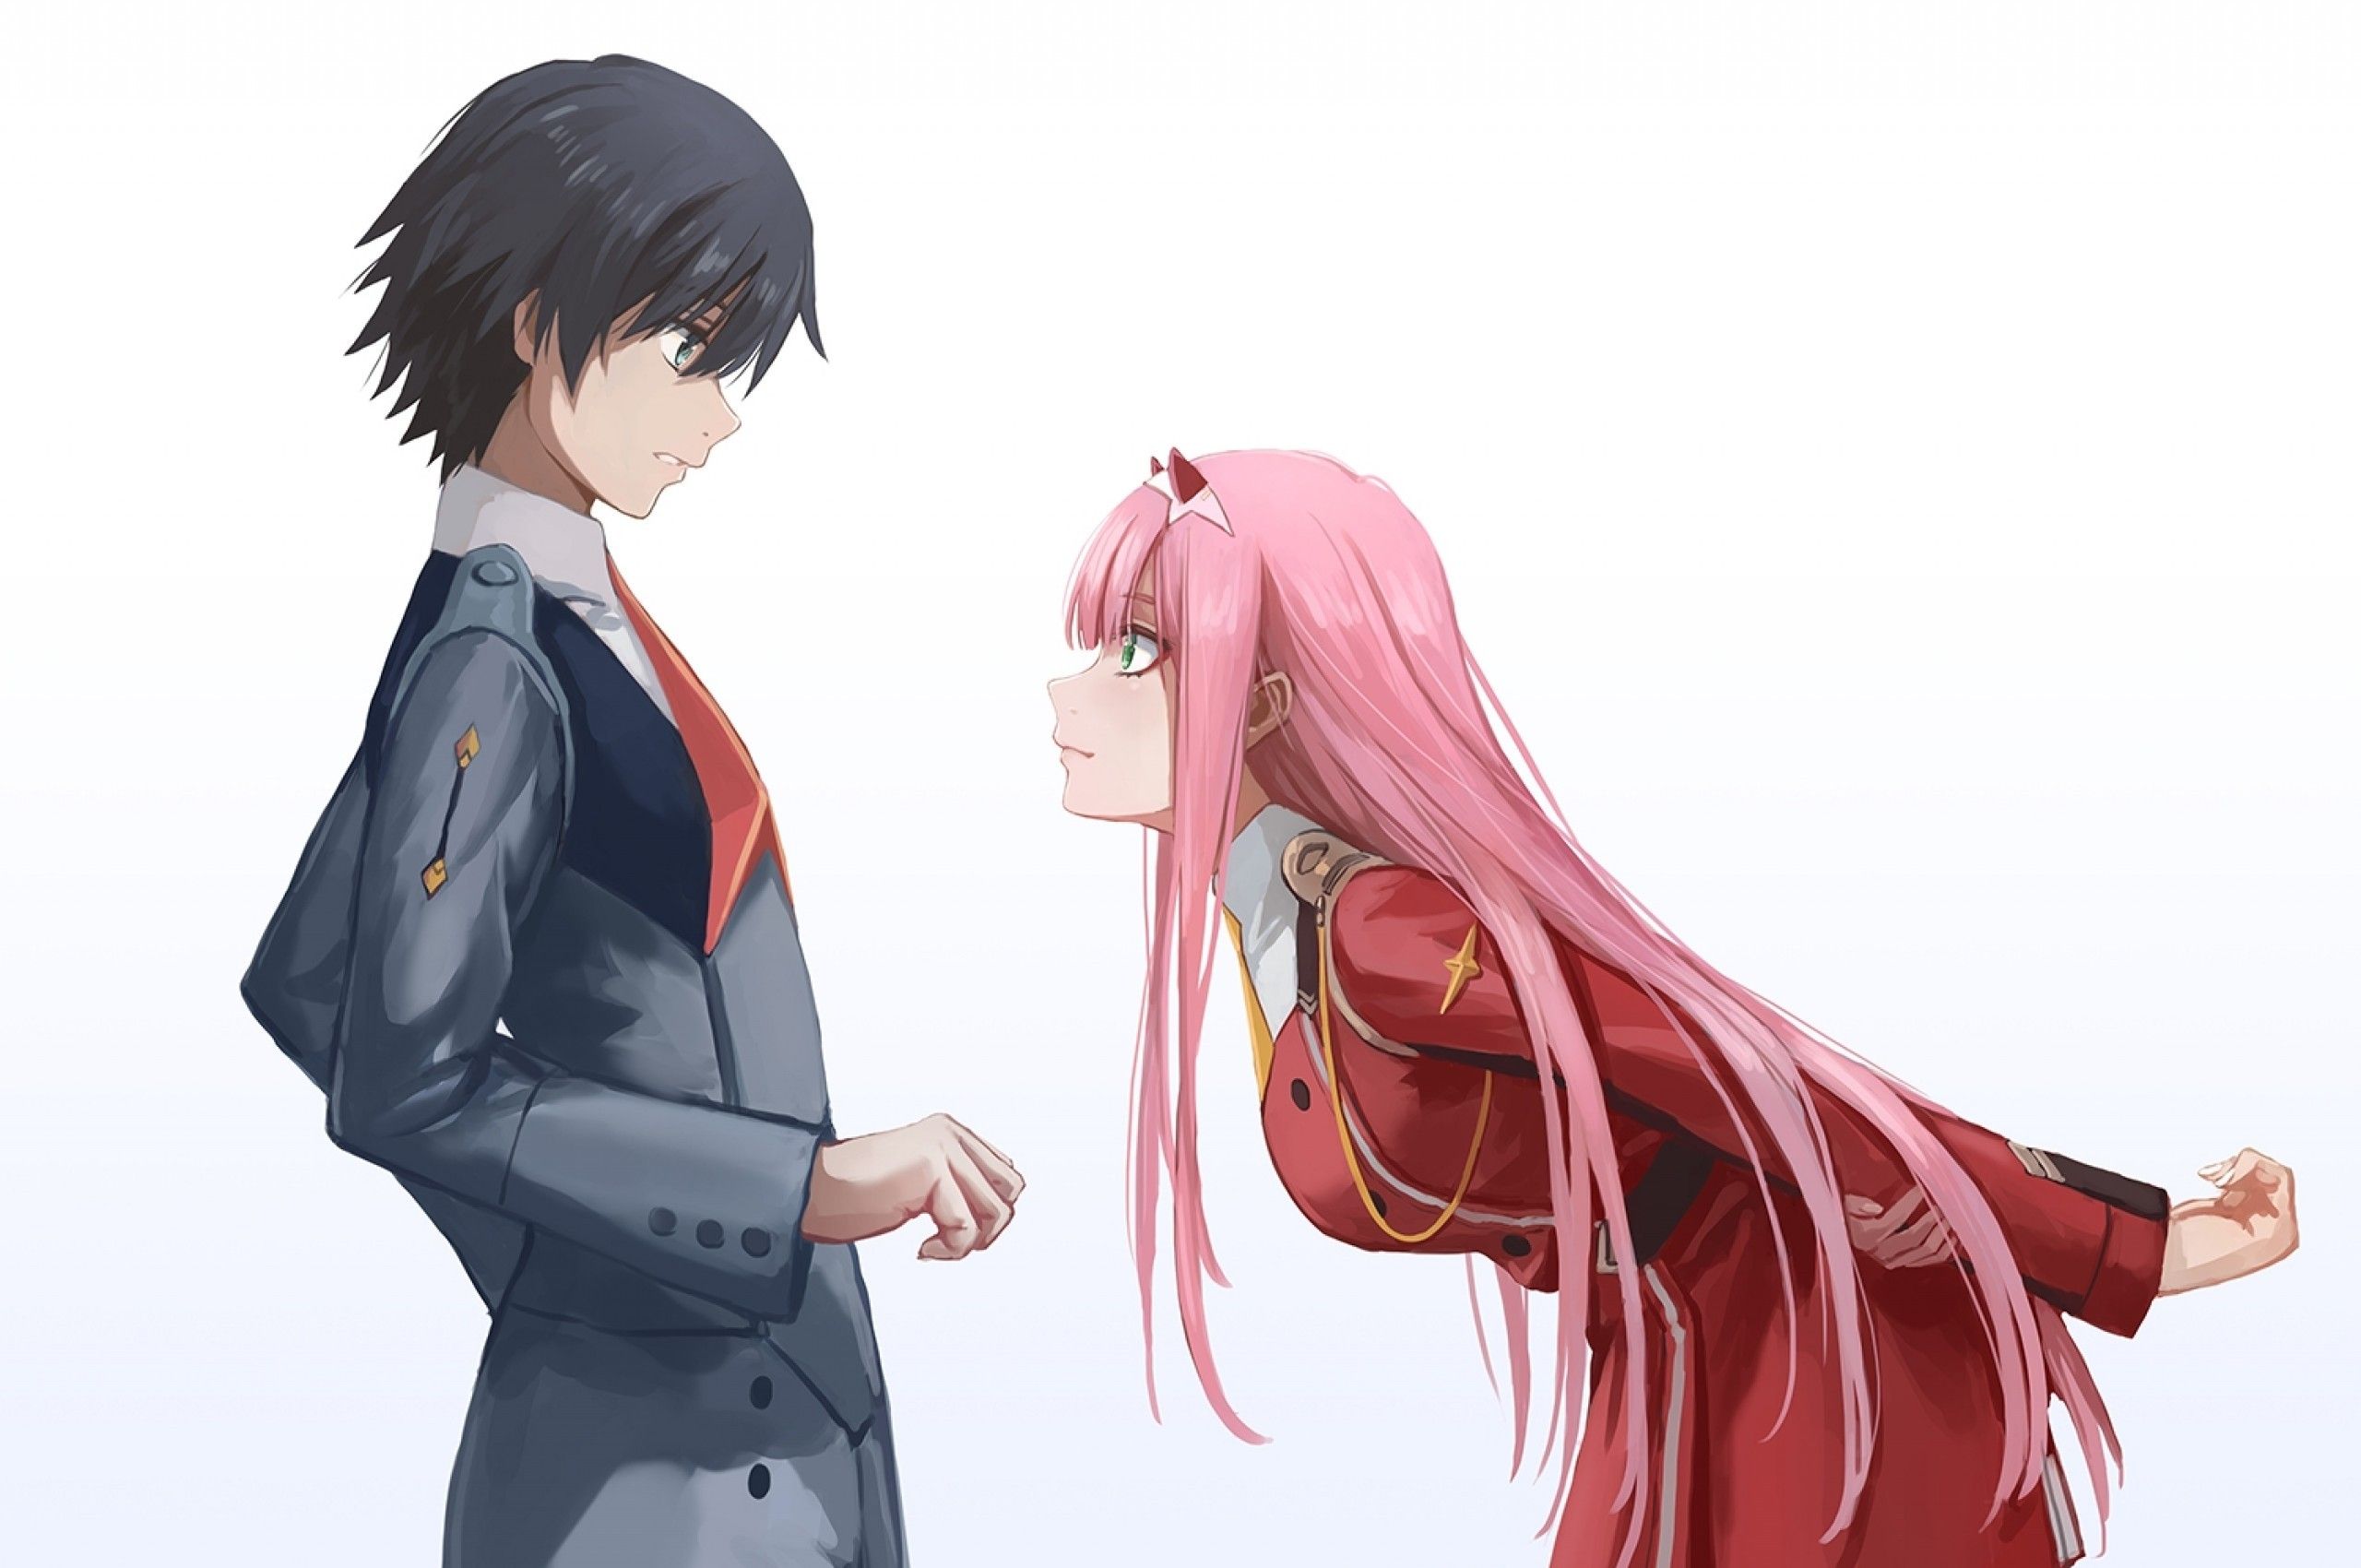 Download 2560x1700 Zero Two X Hiro, Darling In The Franxx, Pink Hair, Profile View, Romance, Couple Wallpaper for Chromebook Pixel